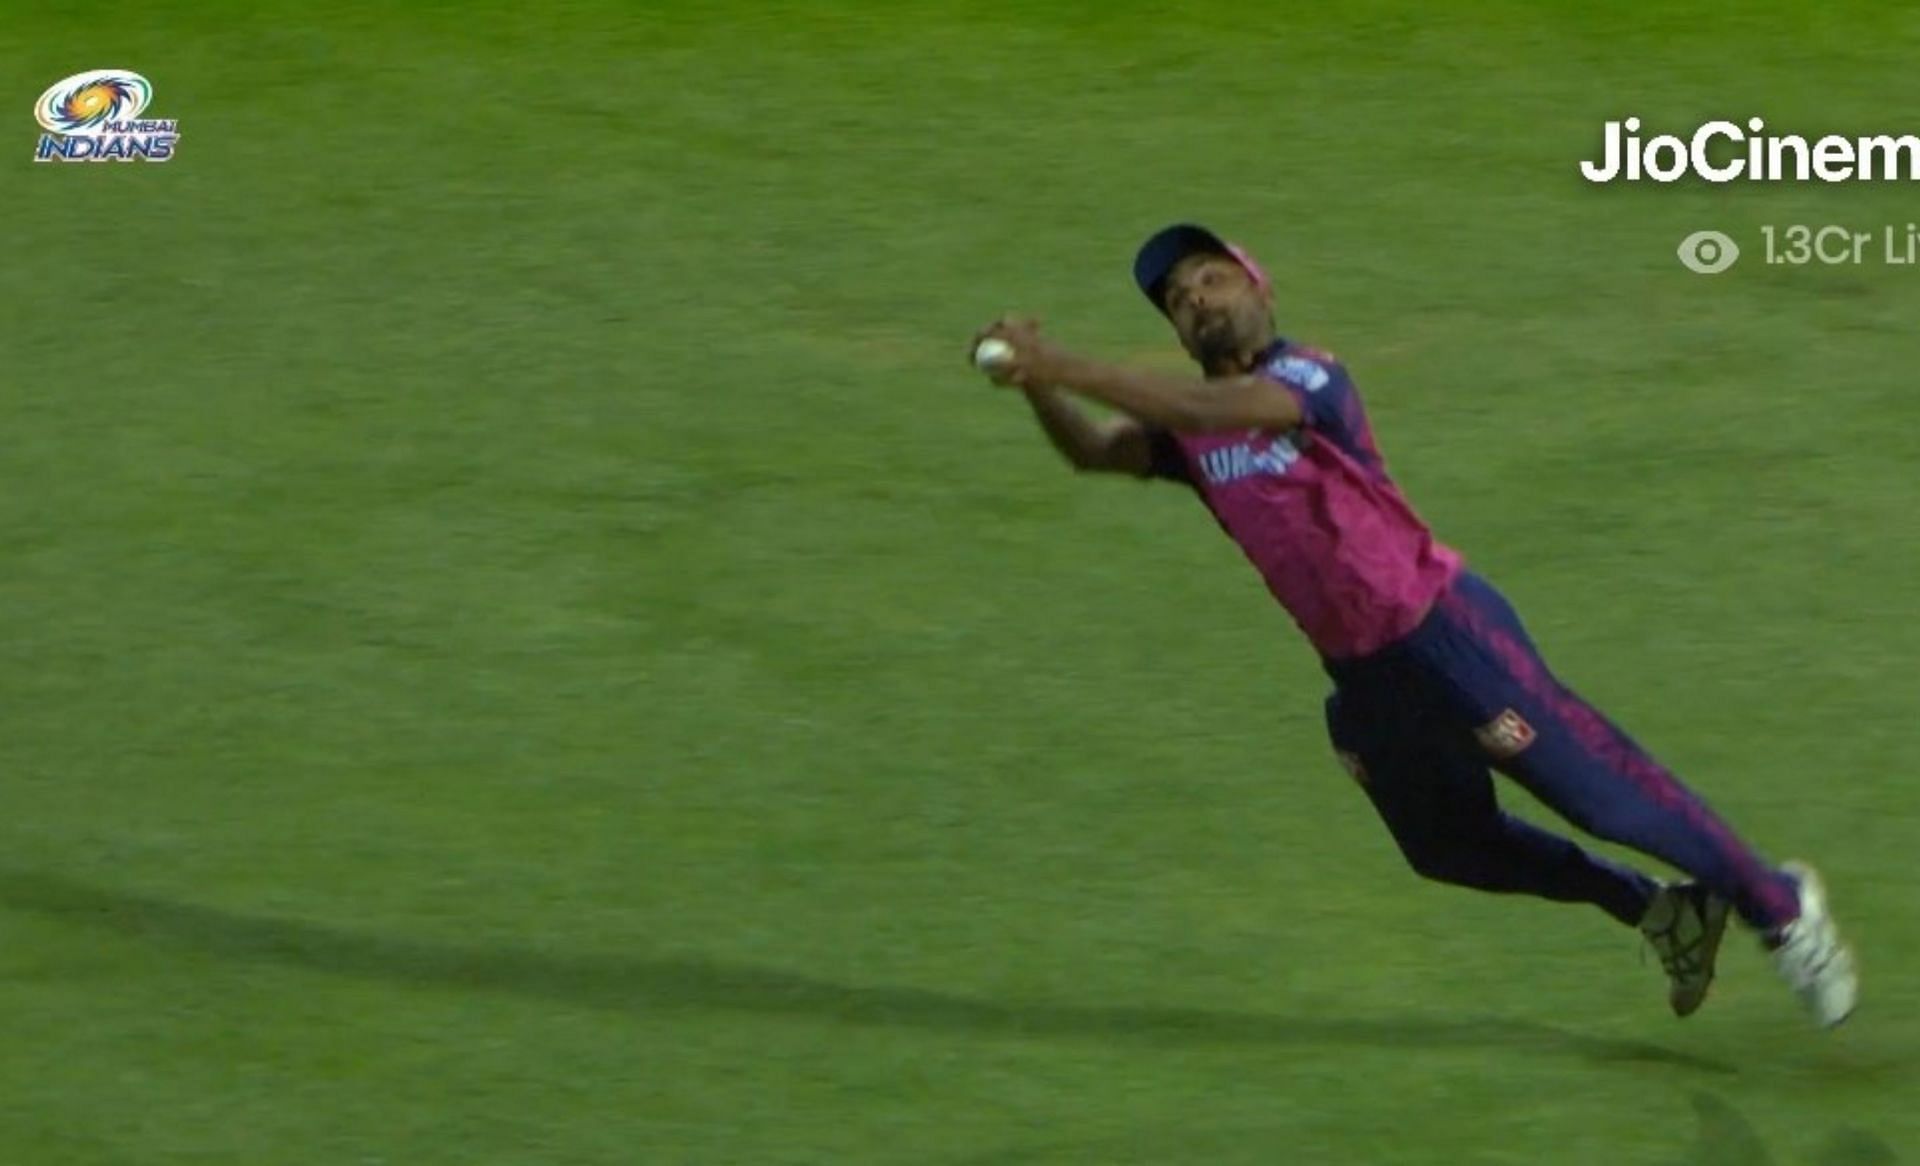 You are currently viewing [WATCH] Sandeep Sharma takes arguably the catch of IPL 2023 to dismiss Suryakumar Yadav during RR vs MI clash